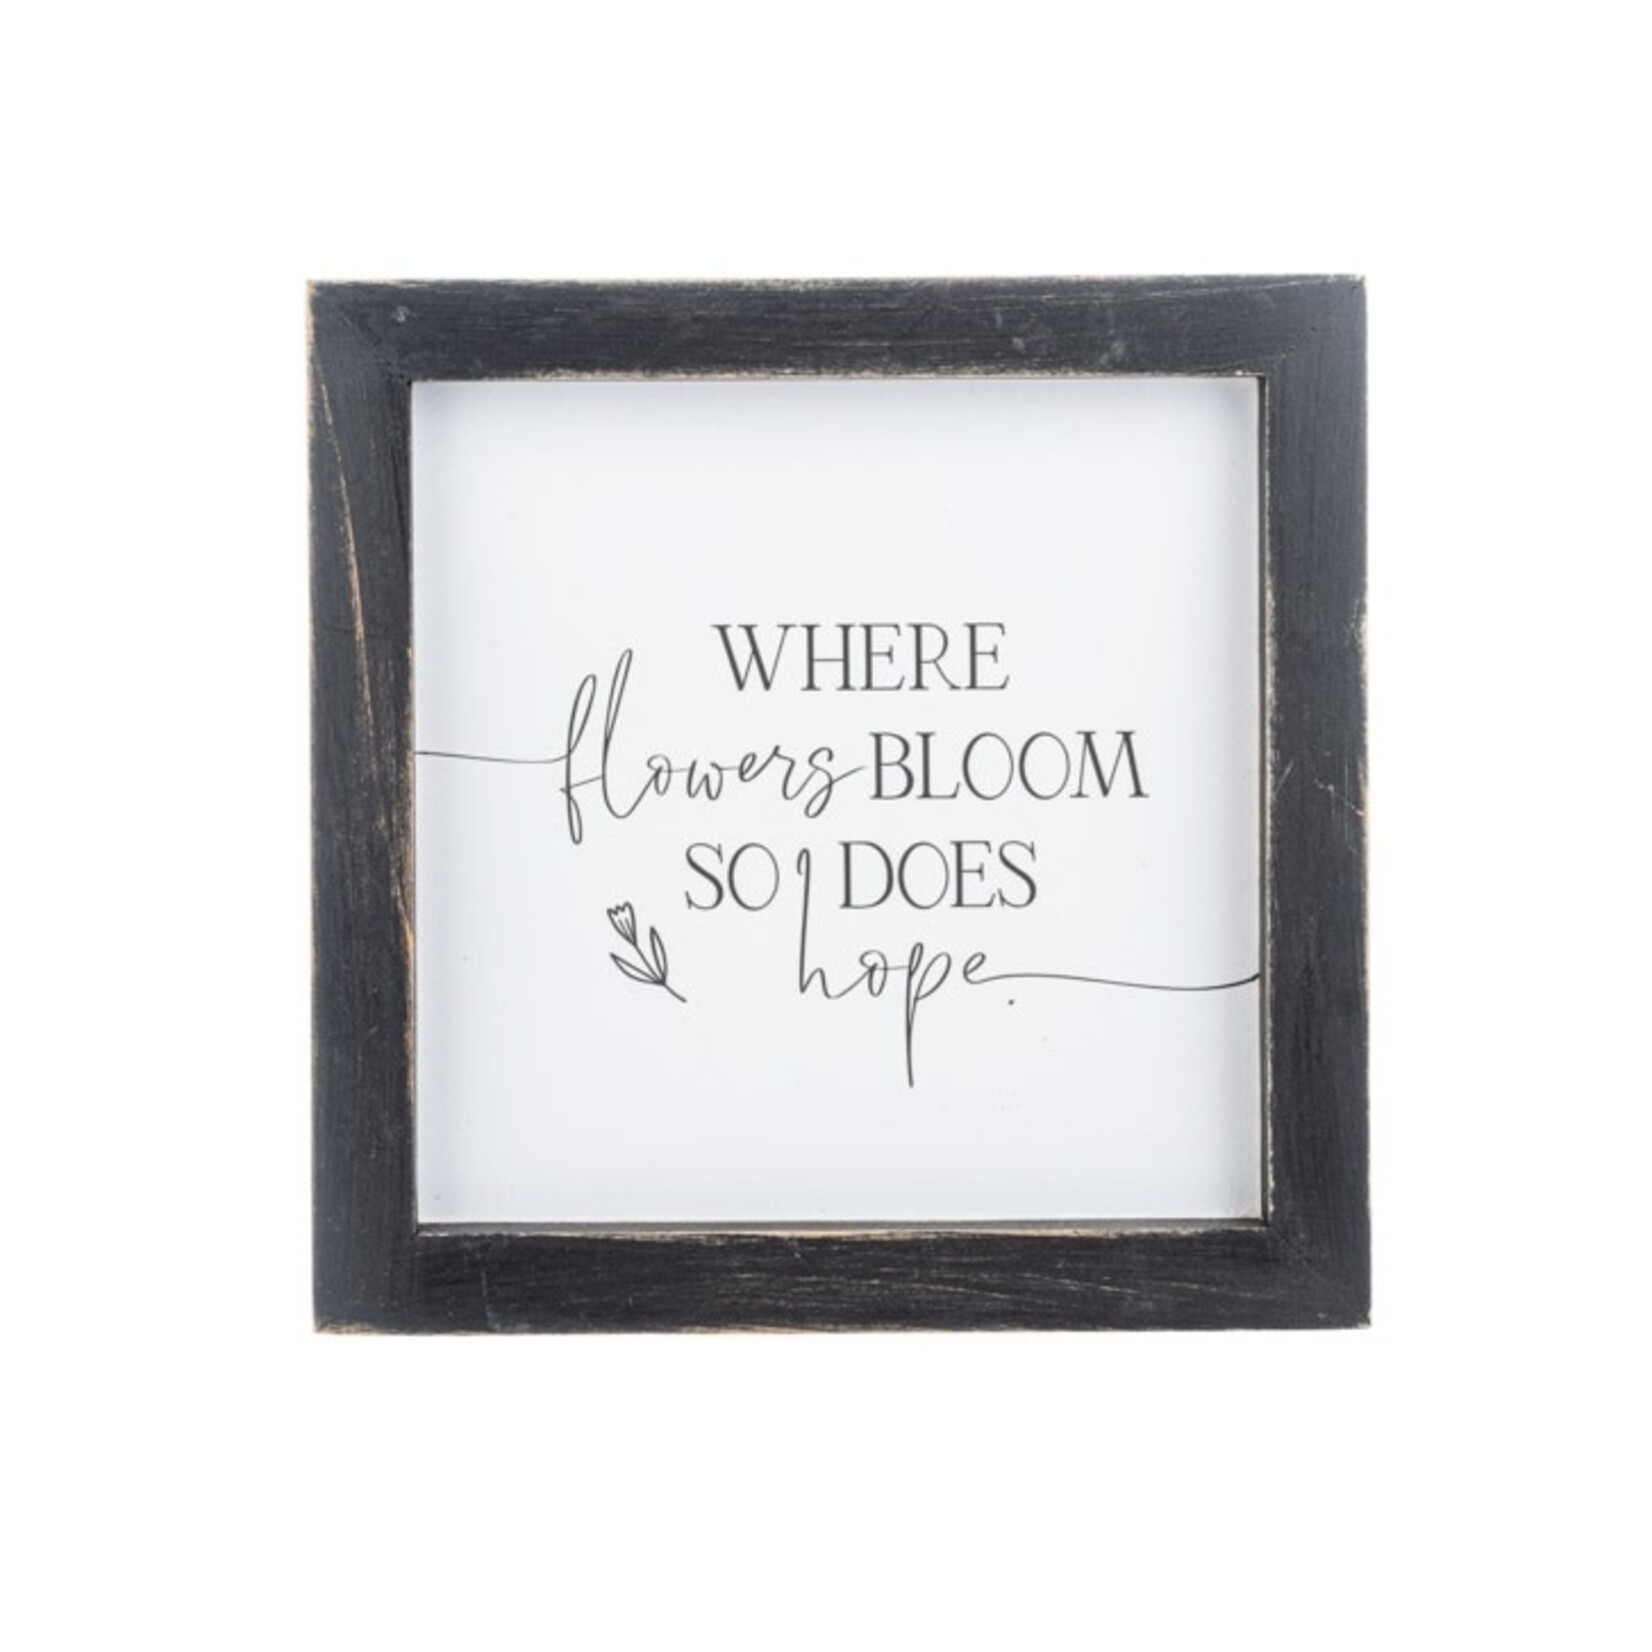 Midwest-CBK Hope Wall Decor